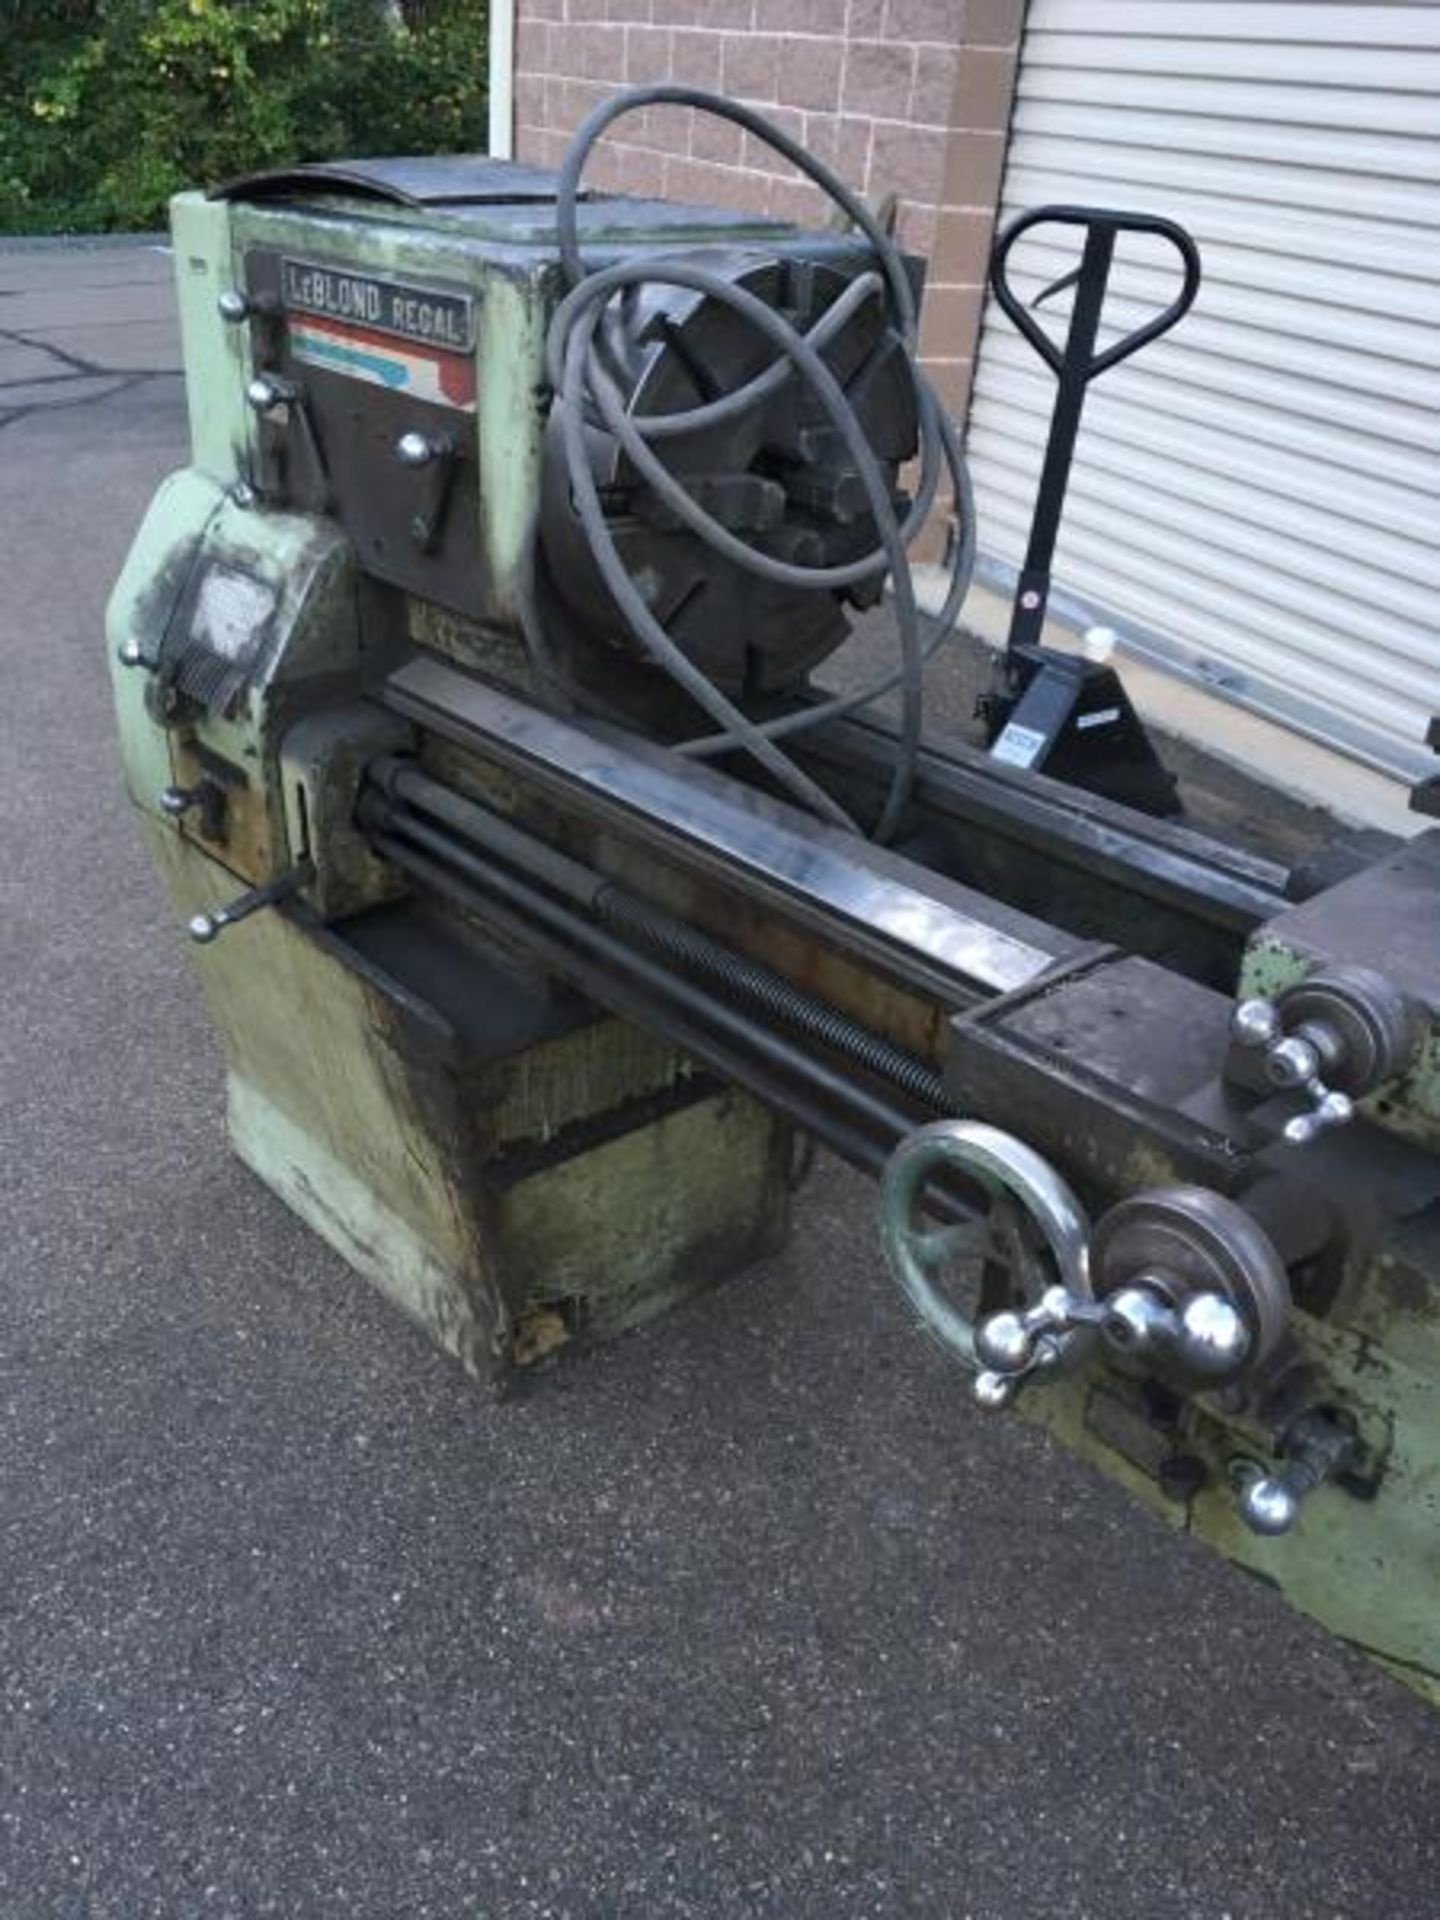 Leblond Regal Lathe with 4Jaw Chuck, Tool Post Holder, Tail Stock and Horton 15-150 Model Chuck - Image 11 of 11